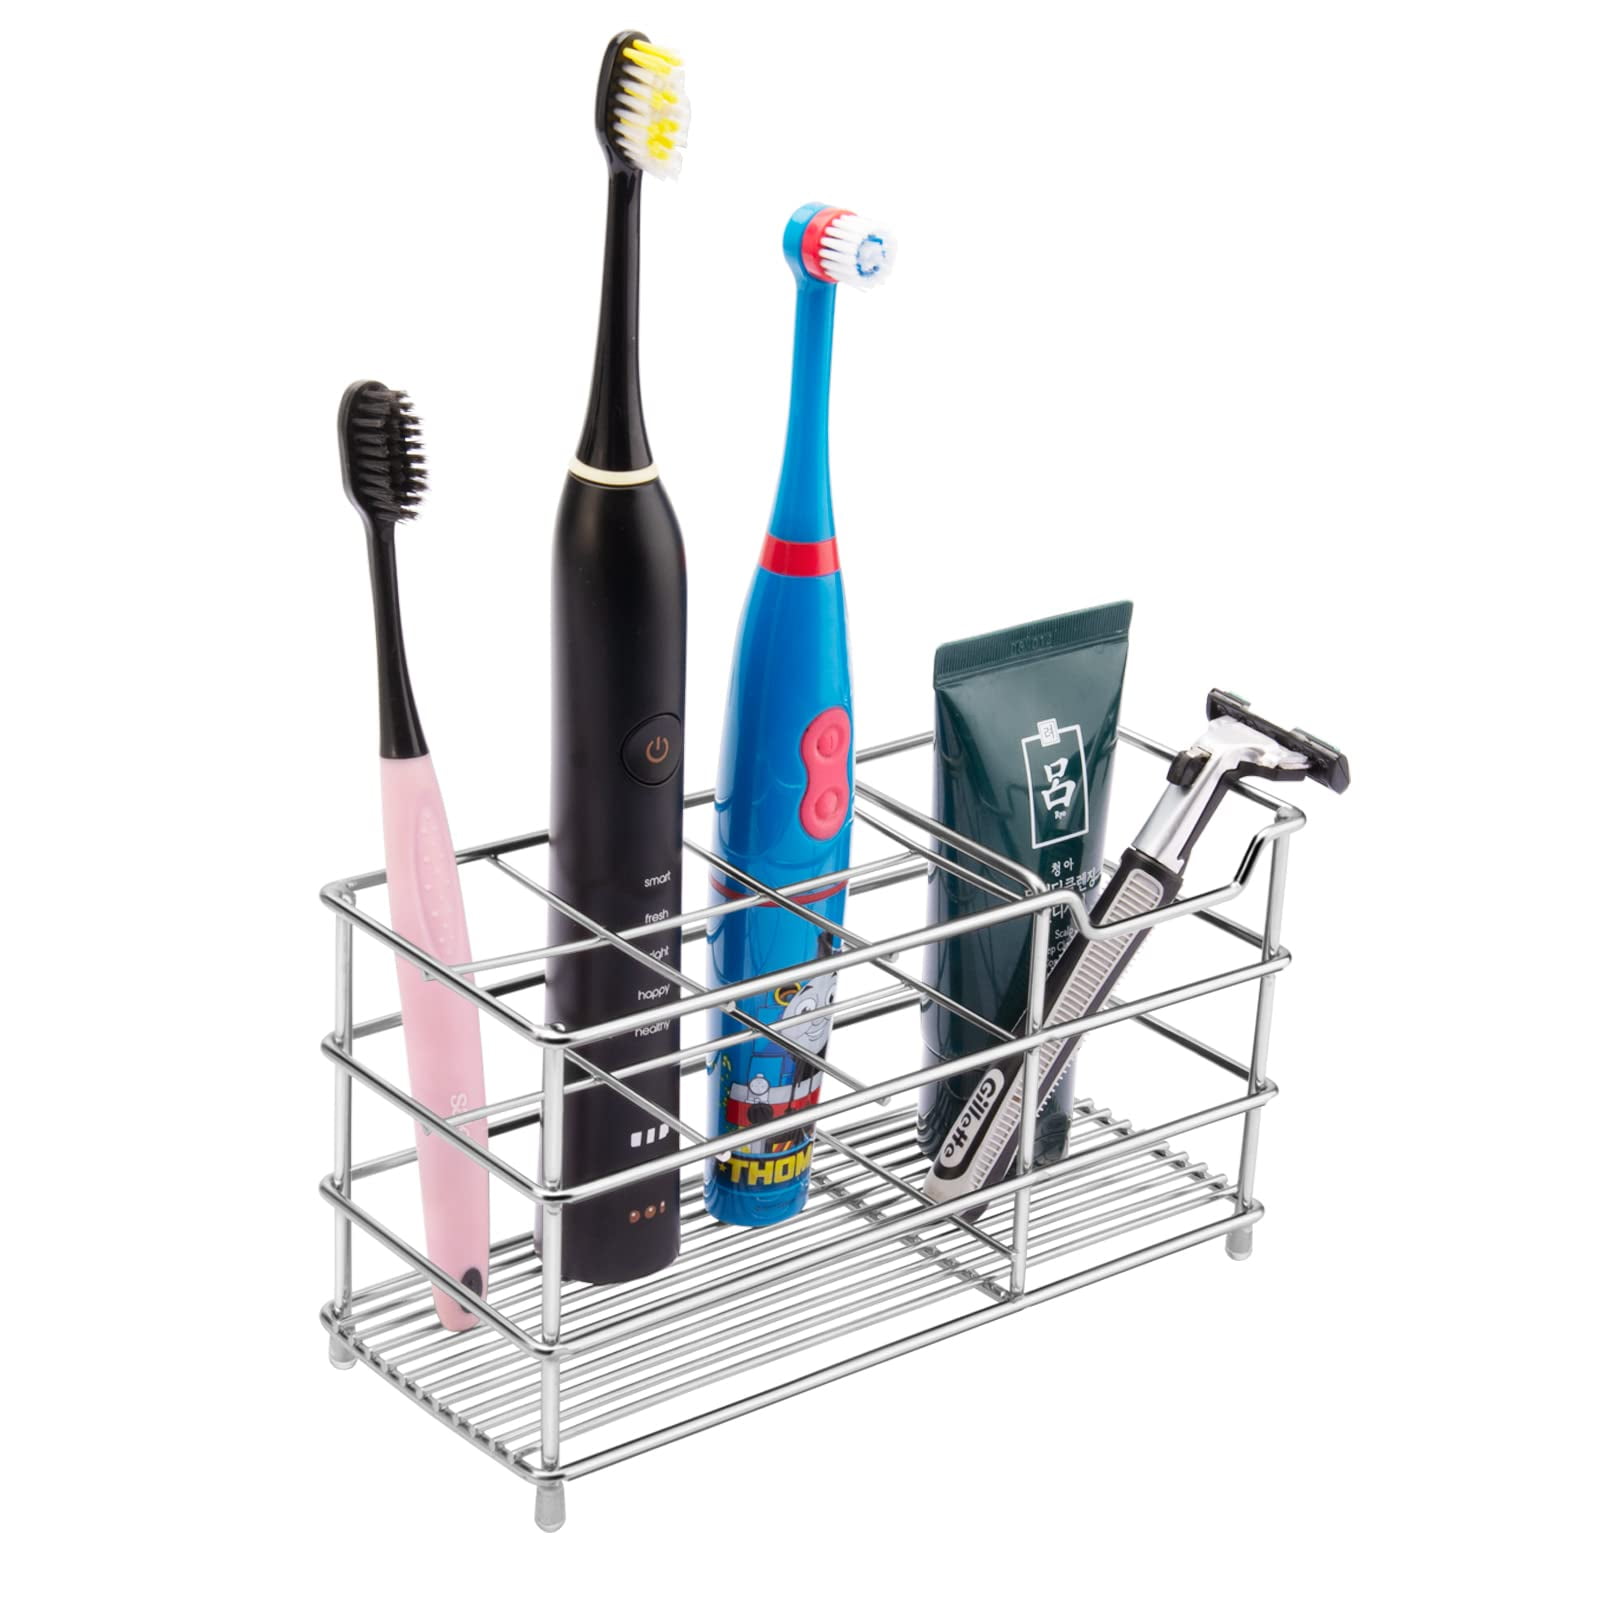 Wall Mounted Bathroom Toothbrush and Bathroom Organizer – All About Tidy